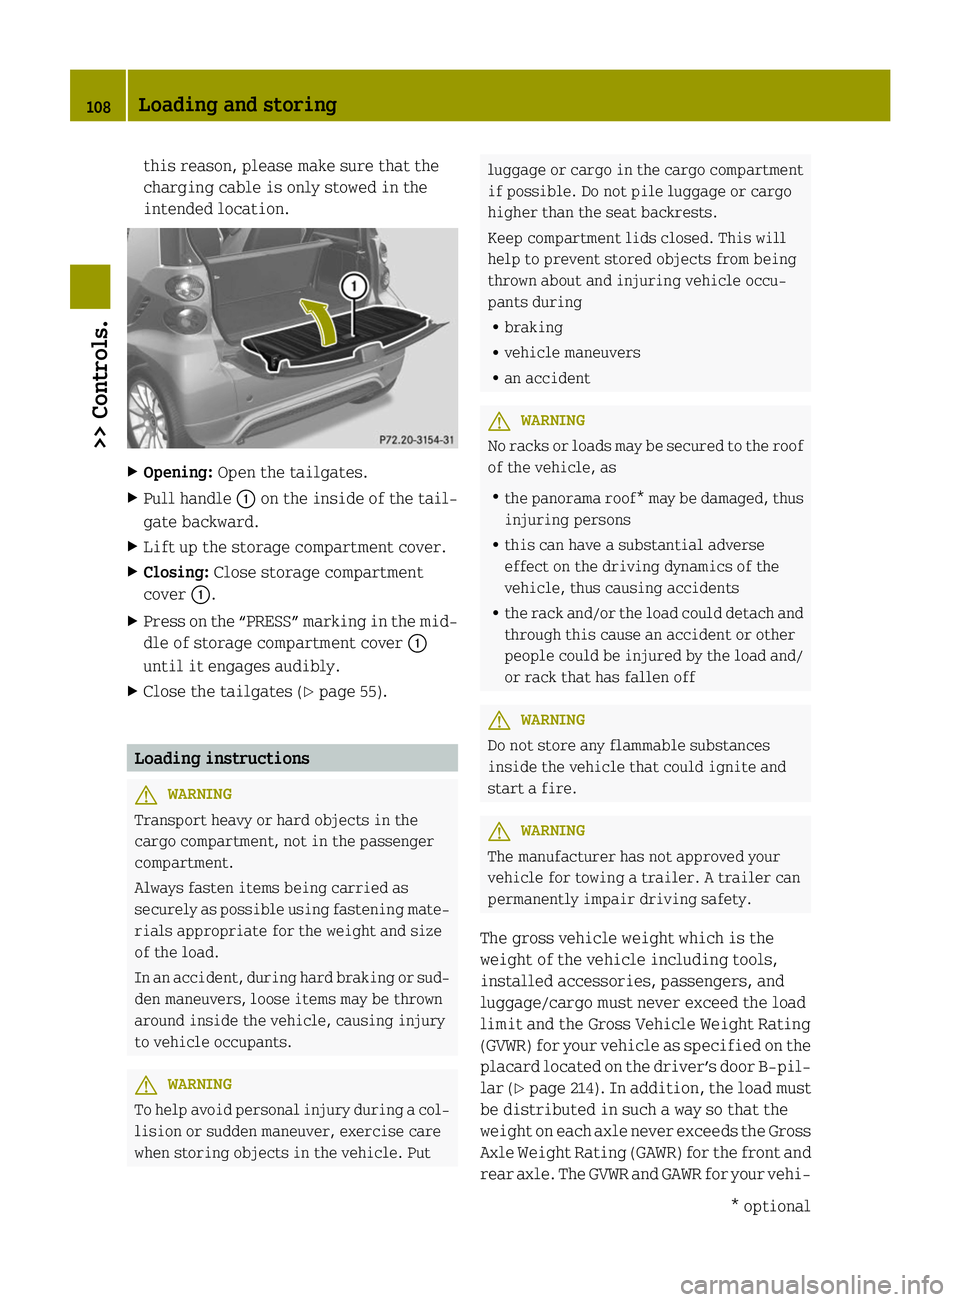 SMART FORTWO COUPE ELECTRIC DRIVE 2014  Owners Manual this reason, please make sure that the
charging cable is only stowed in the
intended location. X
Opening: Open the tailgates.
X Pull handle 0043on the inside of the tail-
gate backward.
X Lift up the 